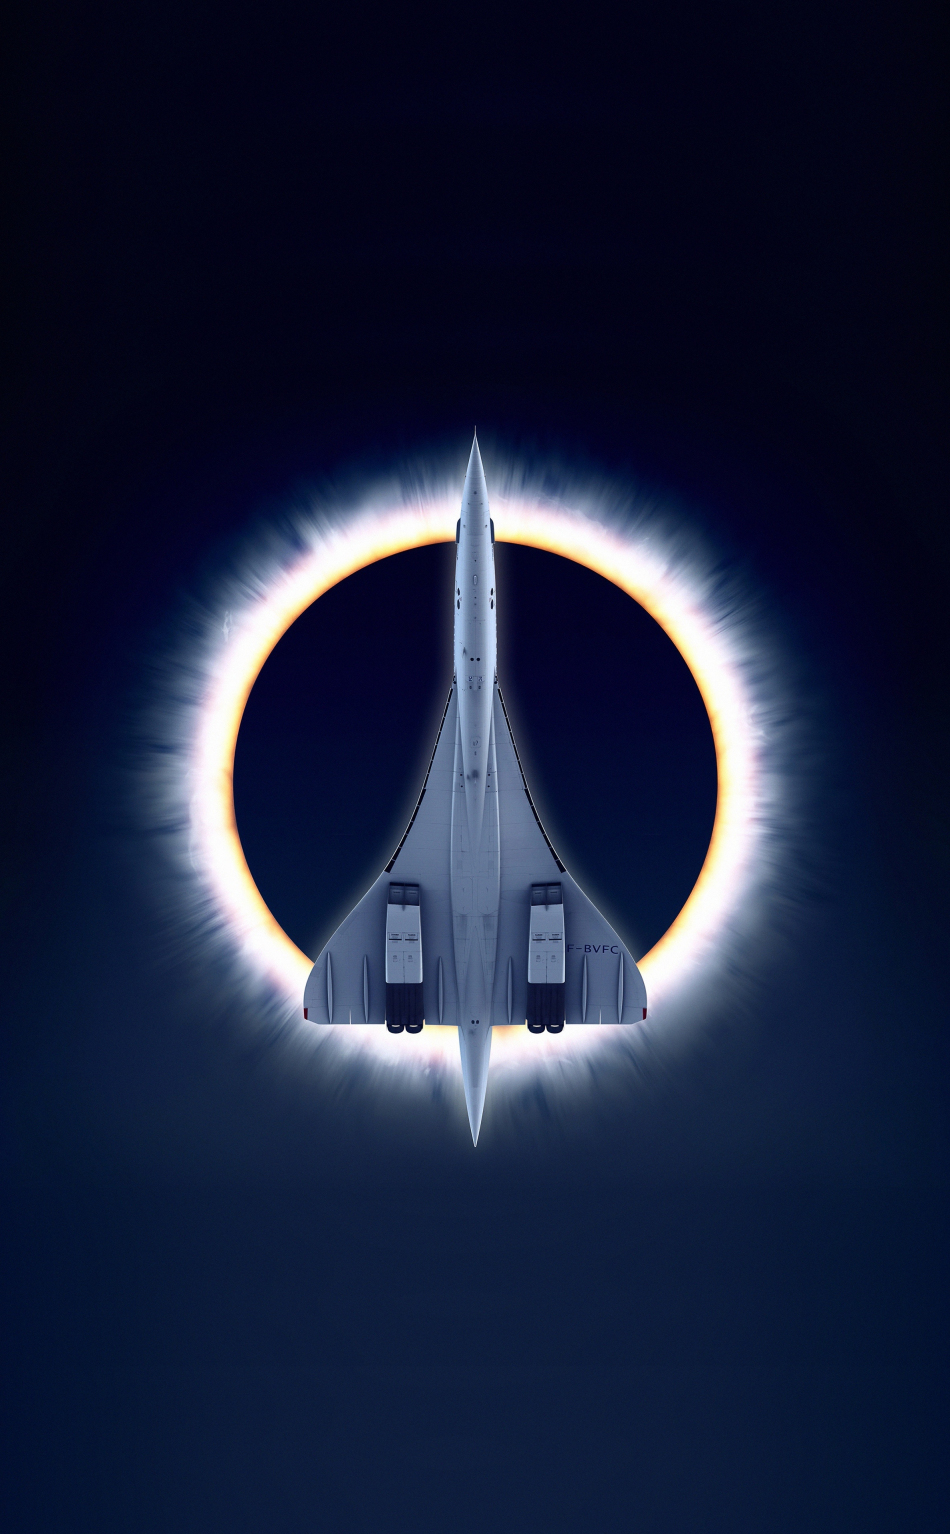 Concorde Carre, eclipse, airplane, moon, aircraft, 950x1534 wallpaper